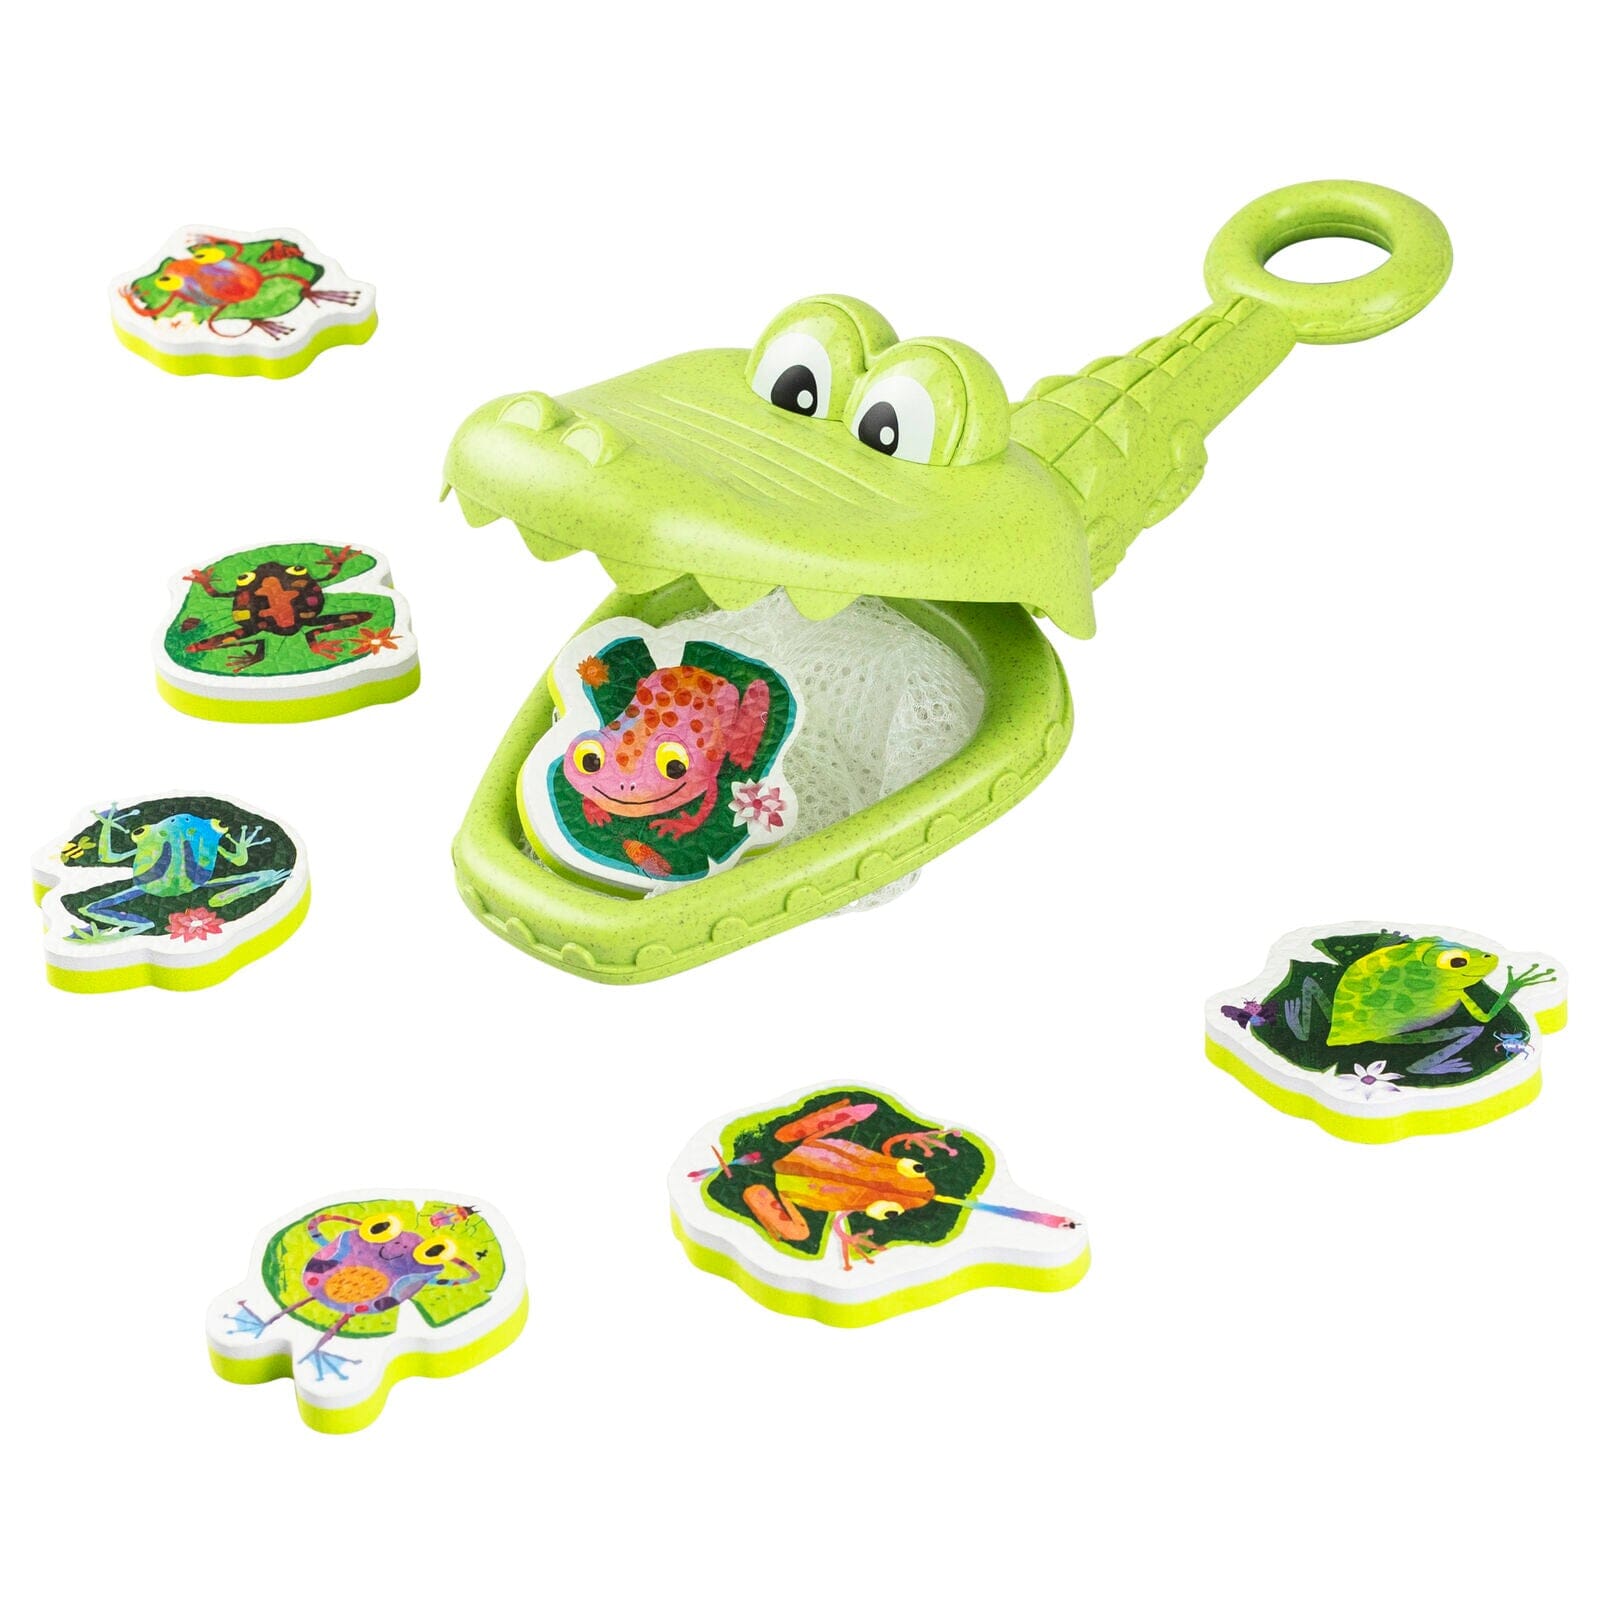 Croc Chasey (Catch a Frog)